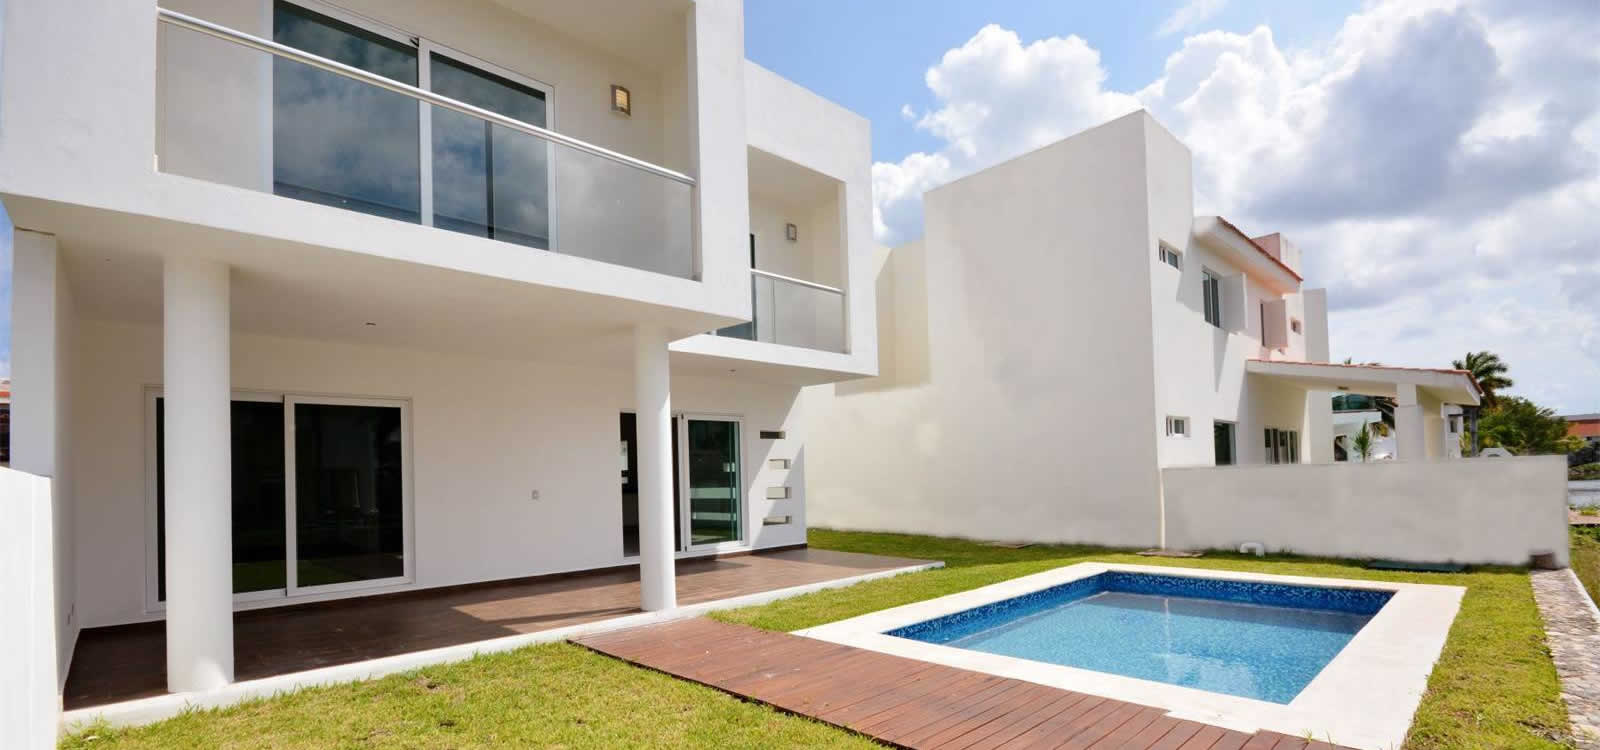 4 Bedroom House for Sale, Cancun, Quintana Roo, Mexico - 7th Heaven ...